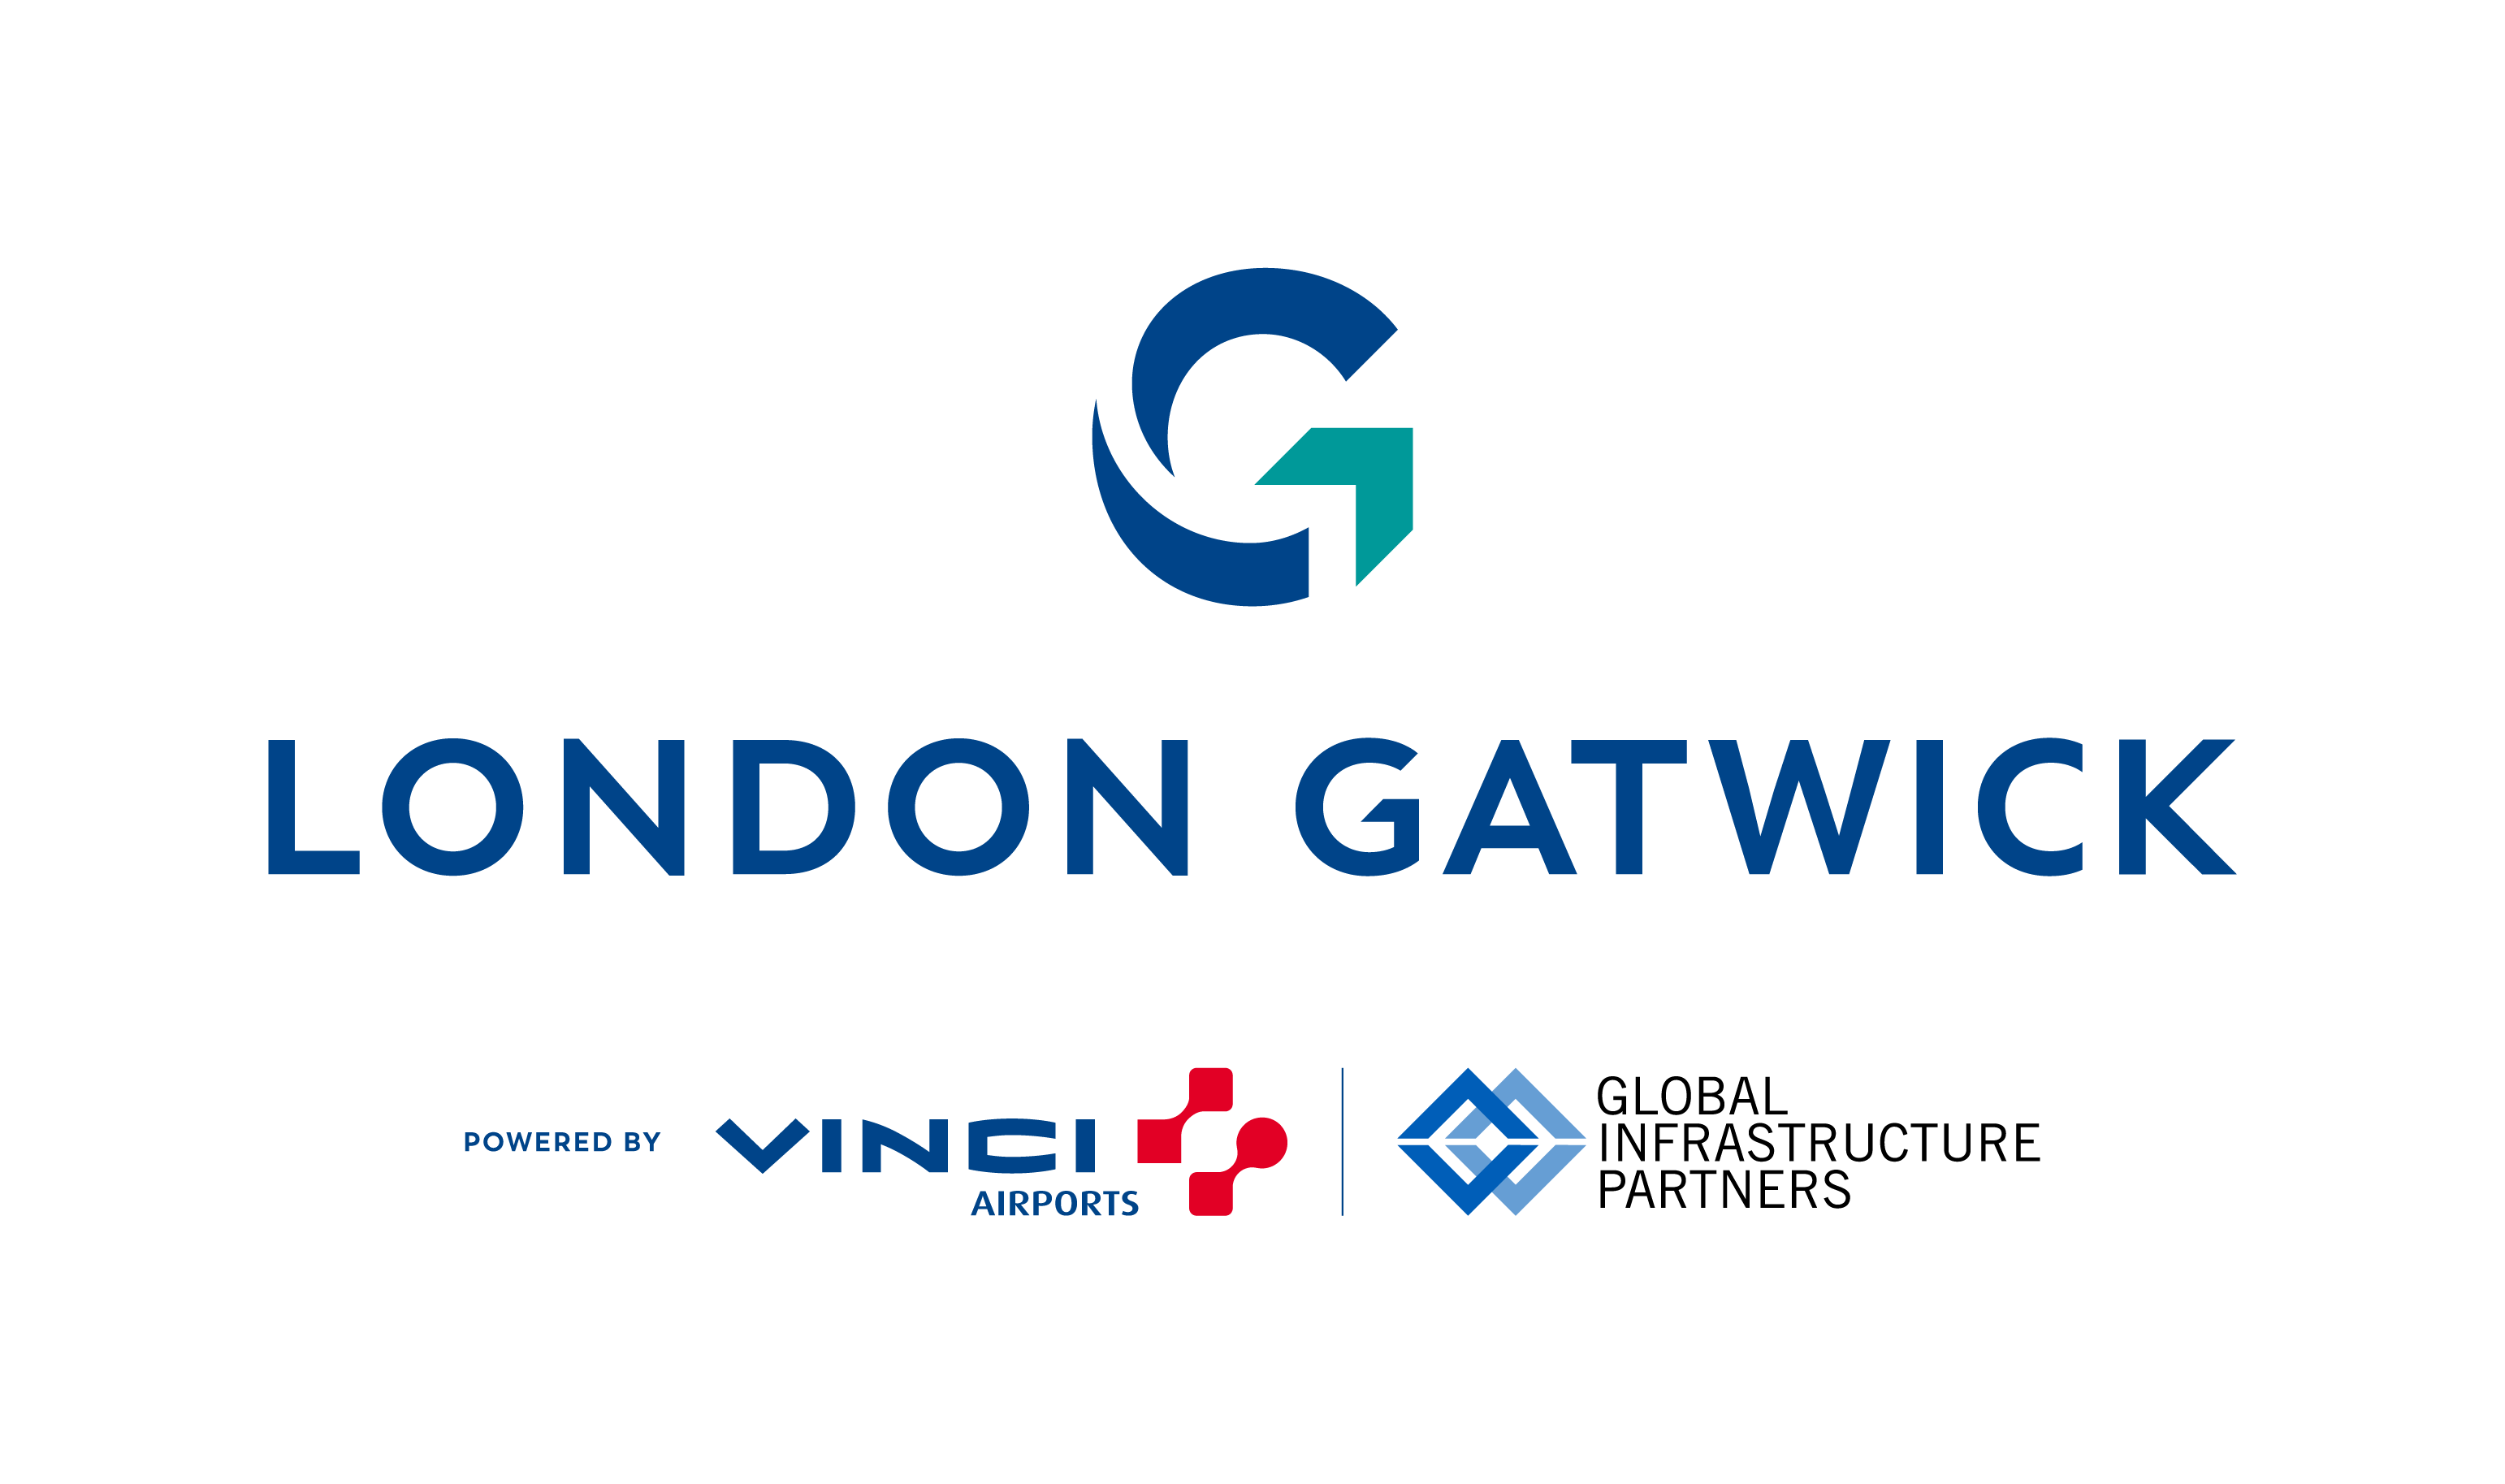 London Gatwick Logo with Vinci Airports and GIP